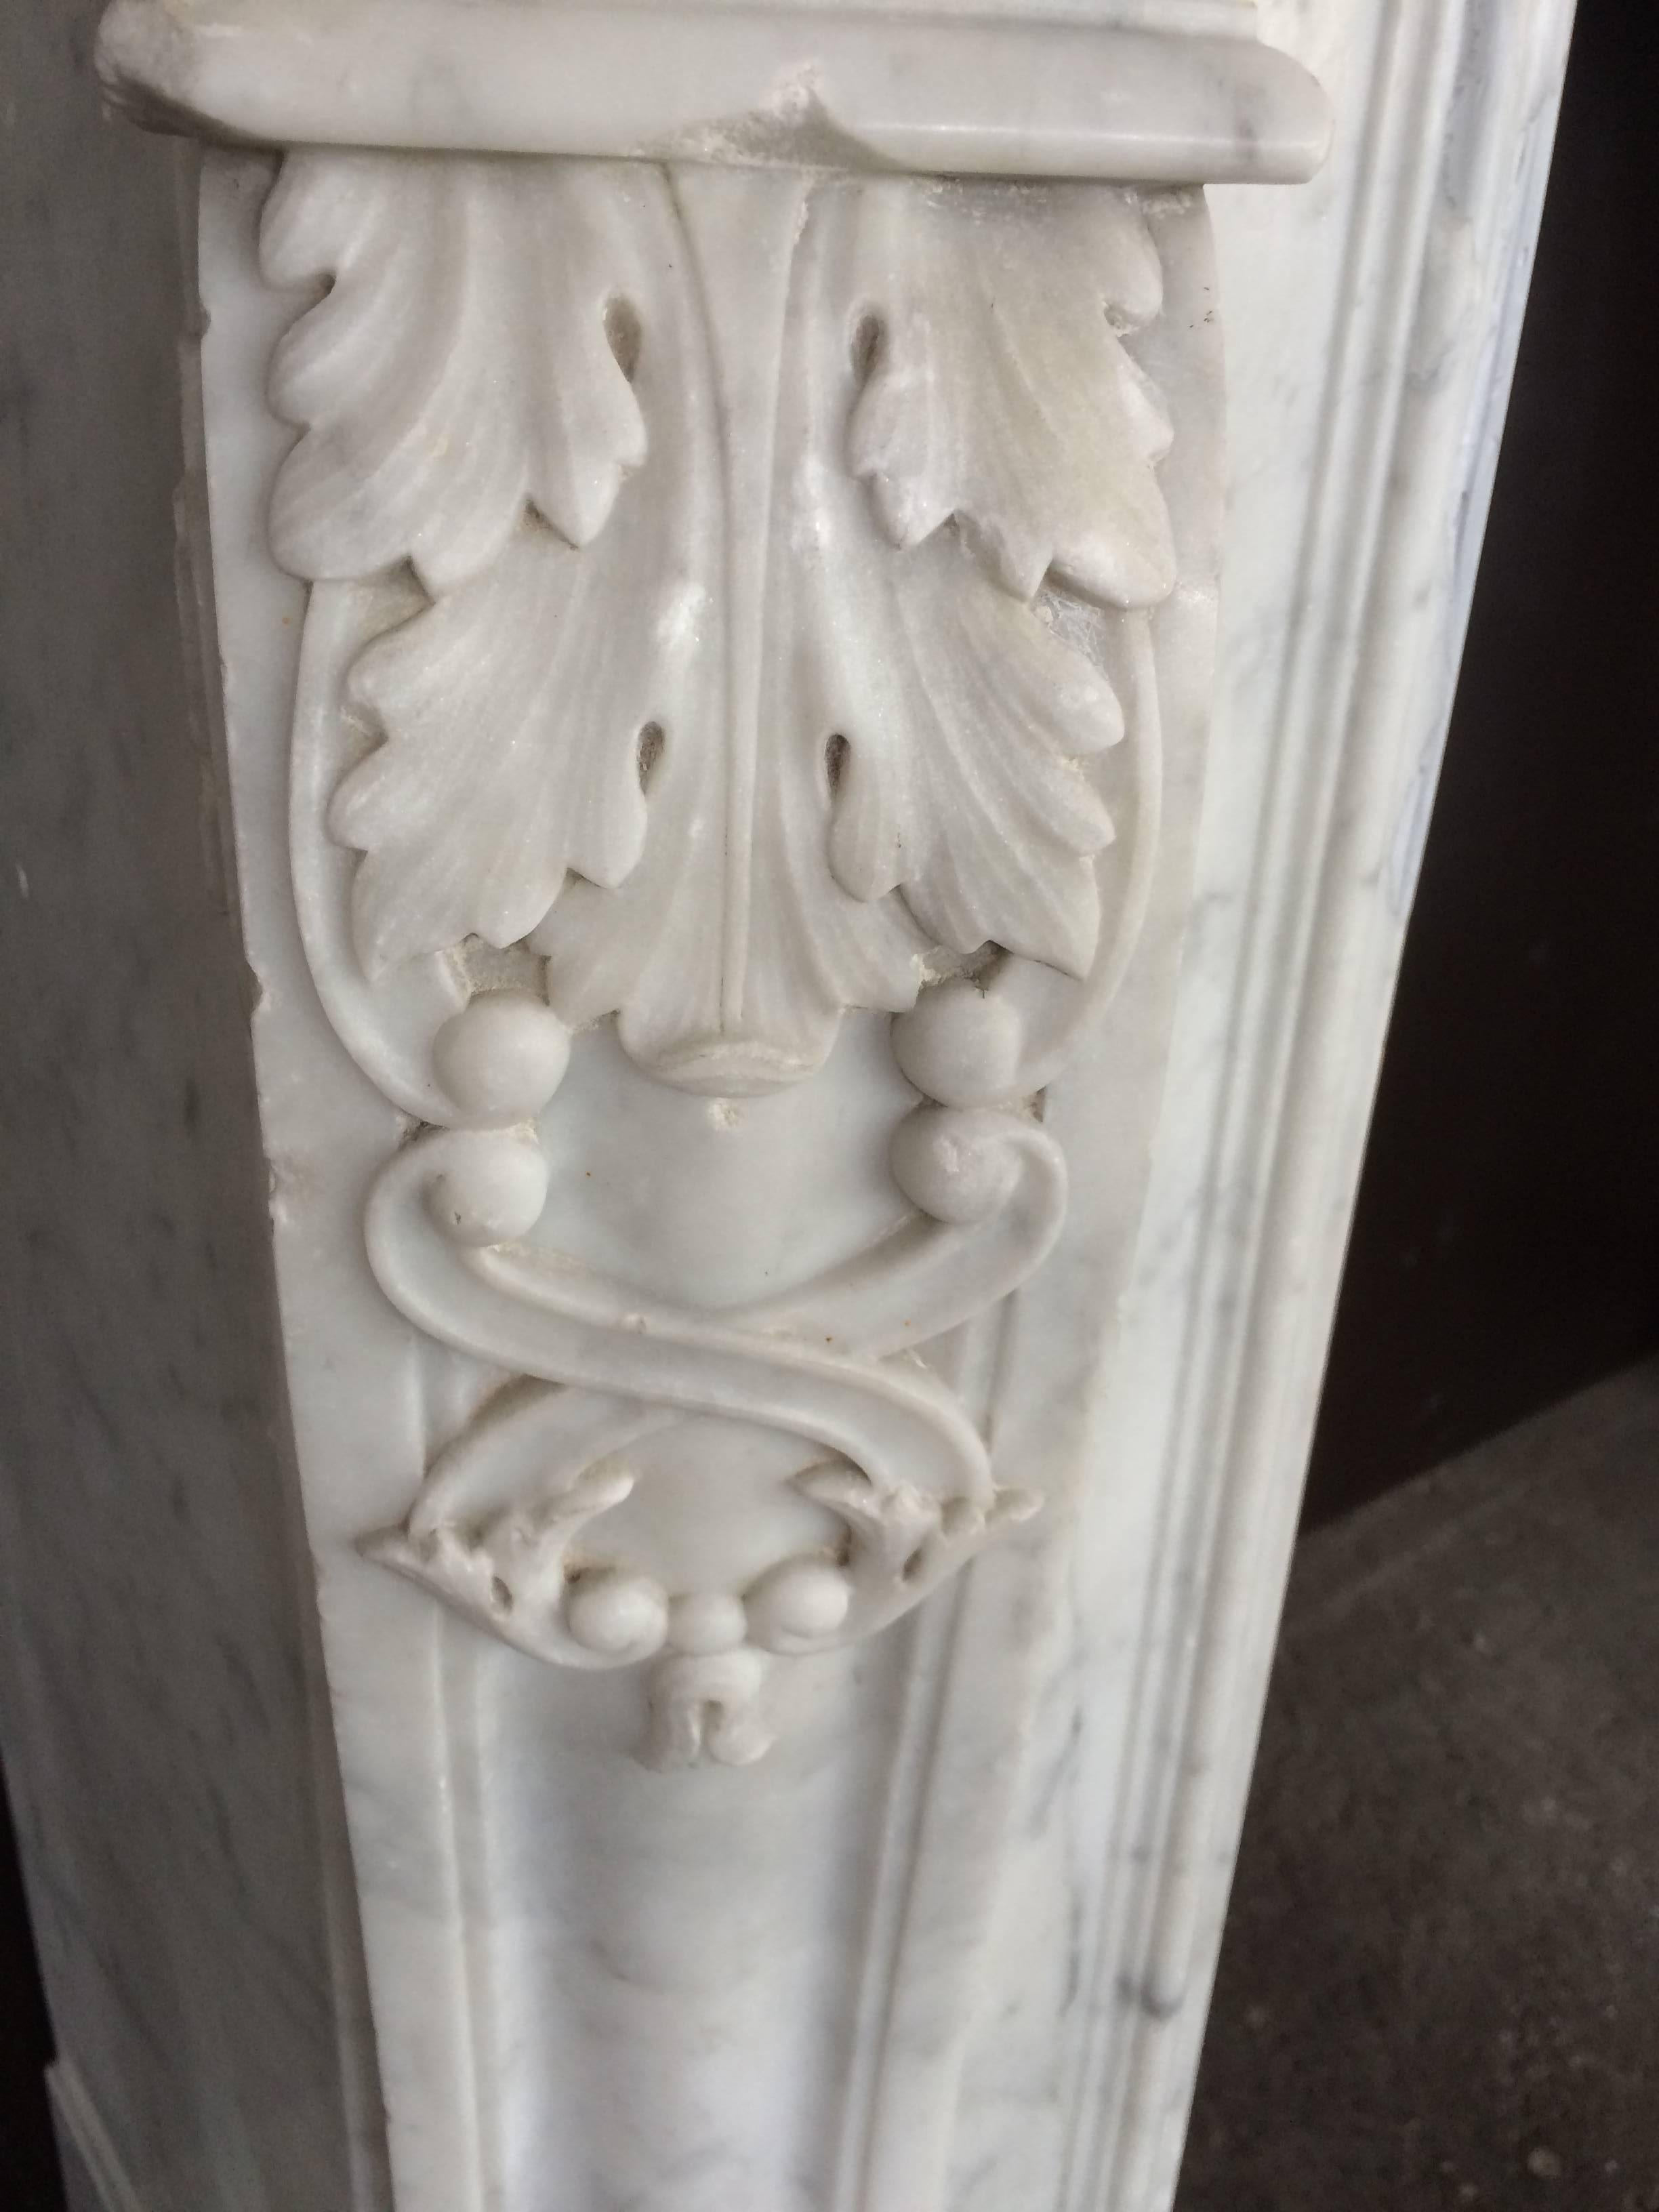 Antique marble fireplace white Carrera exceptional quality, 19th C, France.
High end quality handcrafted from that period, original and authentic, very unique and rare.
Very detailed leaves and shell on the sides and middle of the mantel, all parts